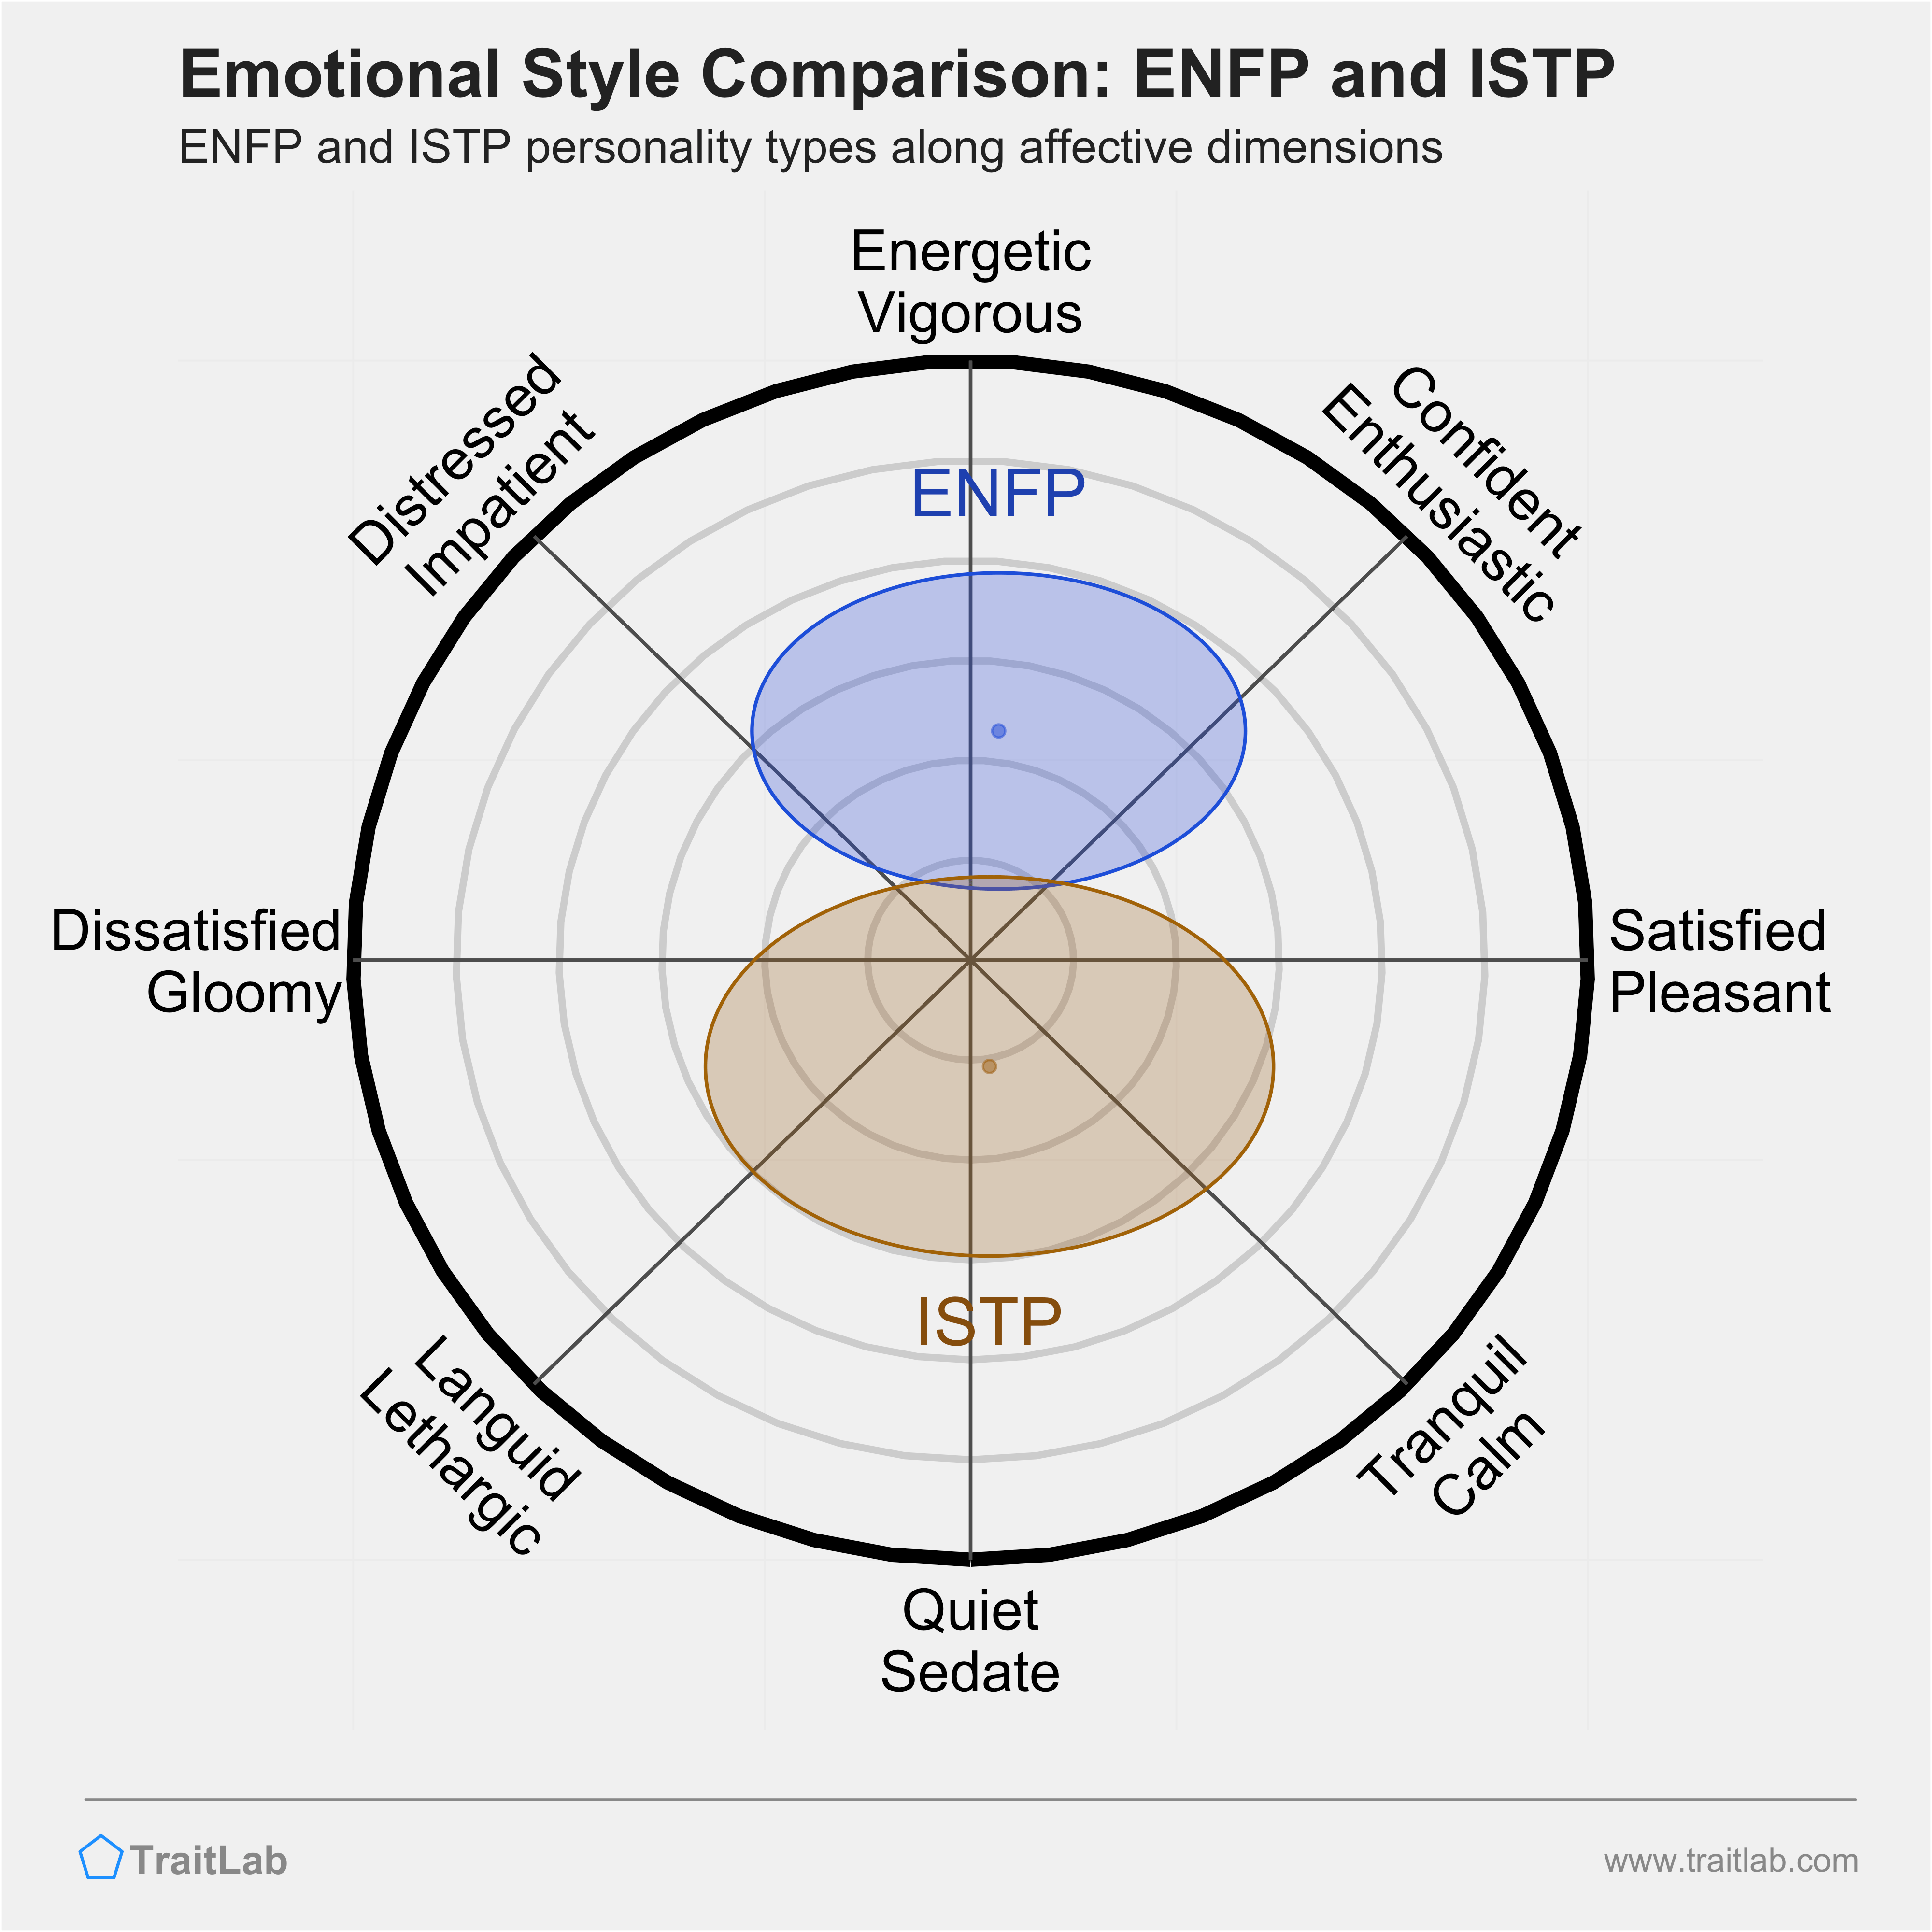 ENFP and ISTP comparison across emotional (affective) dimensions